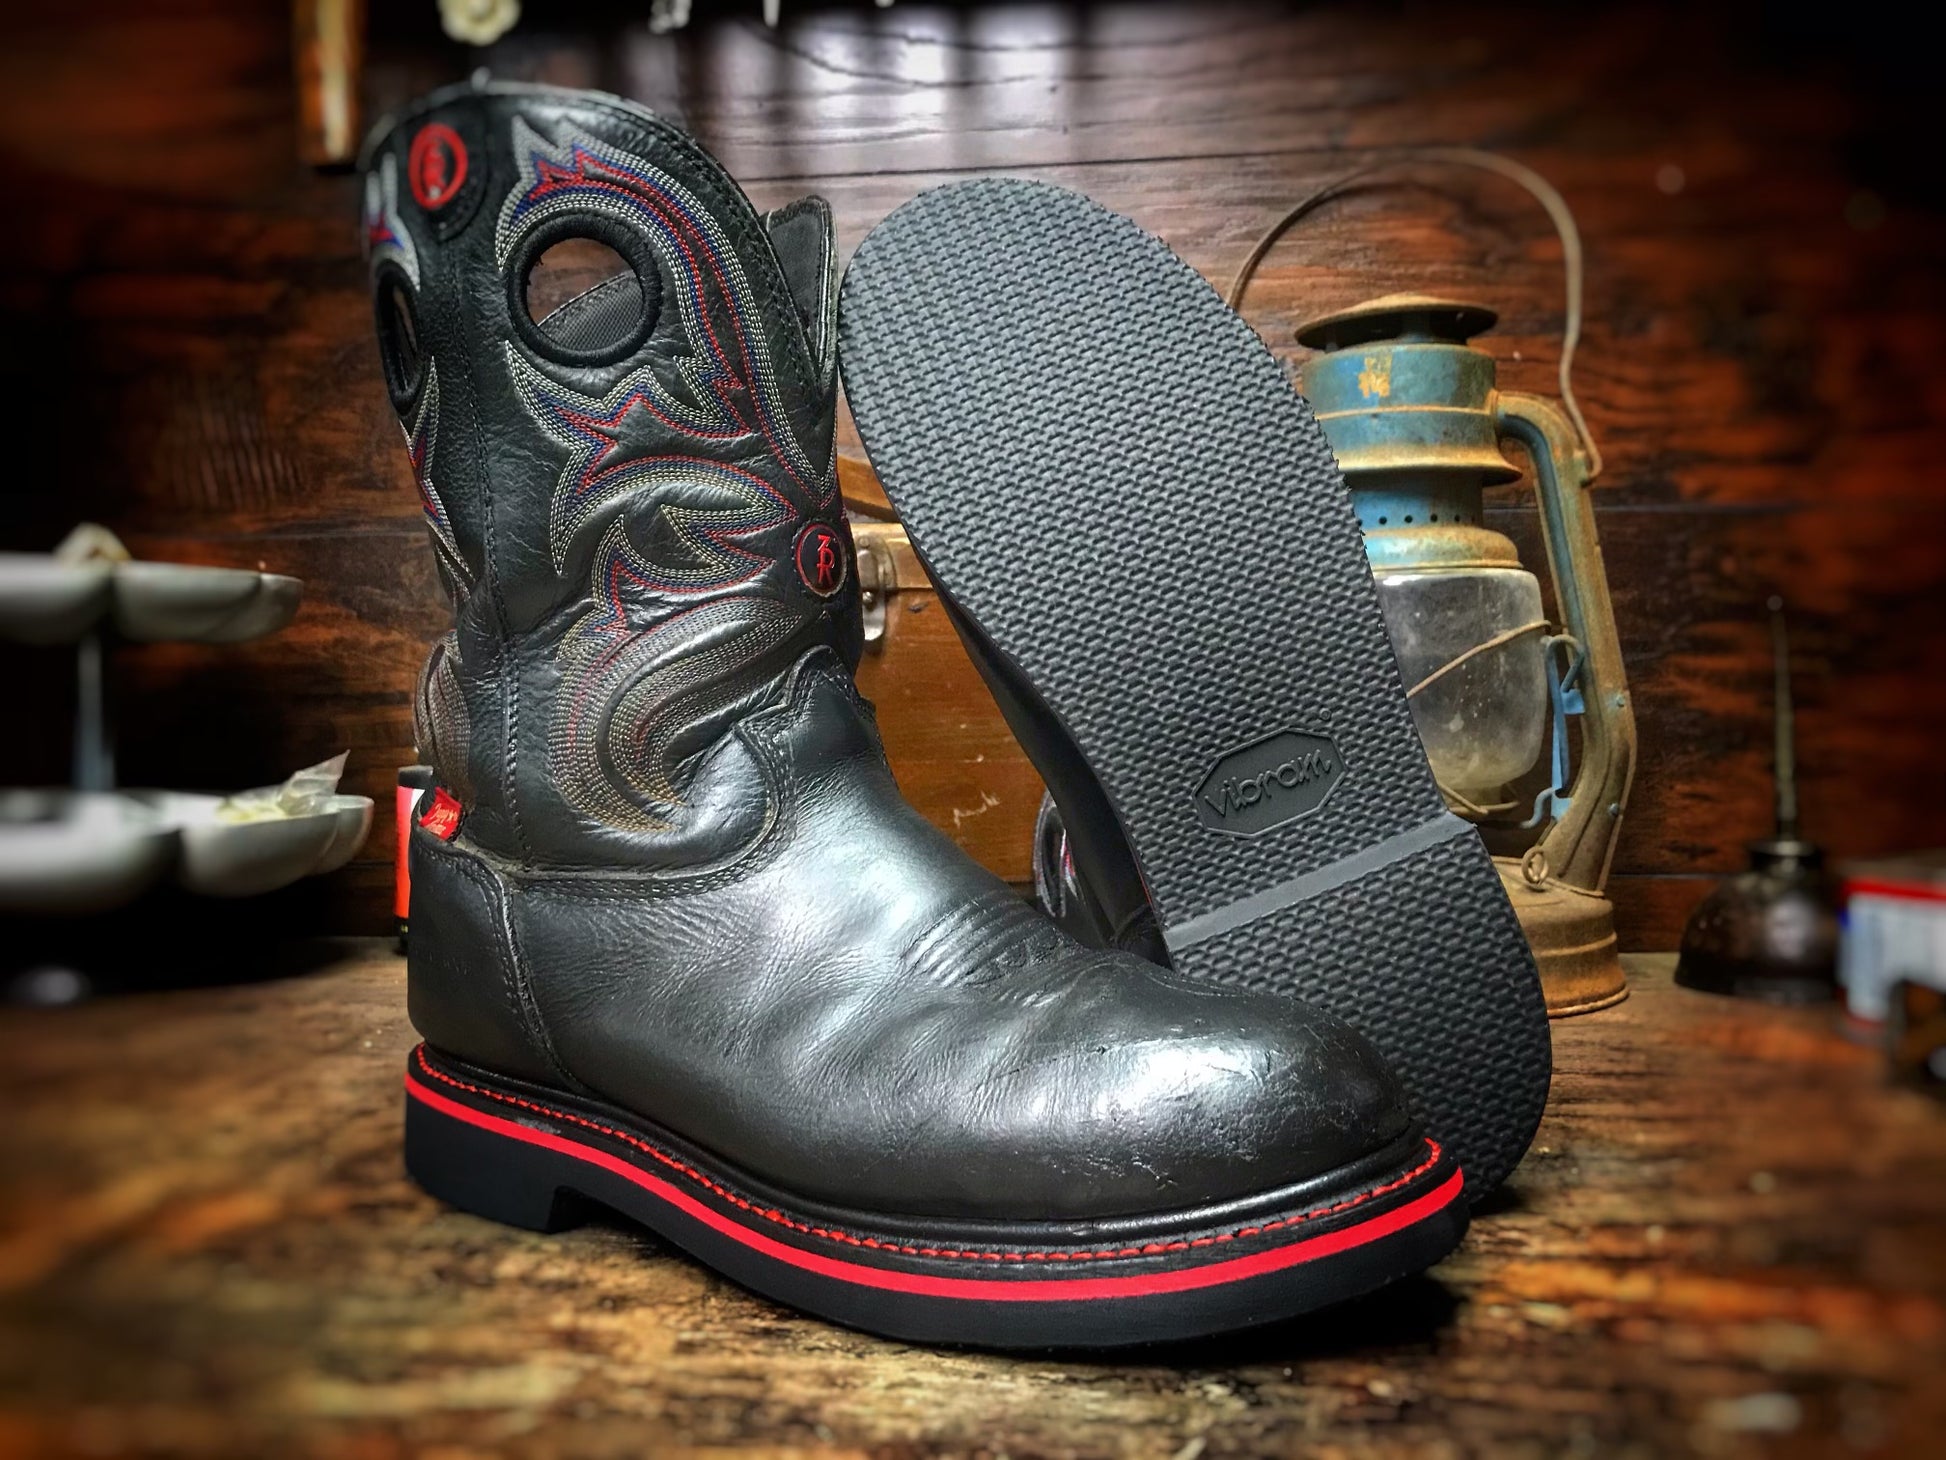 Shoe sole started separating pretty badly. JB Weld rubber glue and a 24hr  no-touch curing quarantine, good as new! : r/InvisibleMending